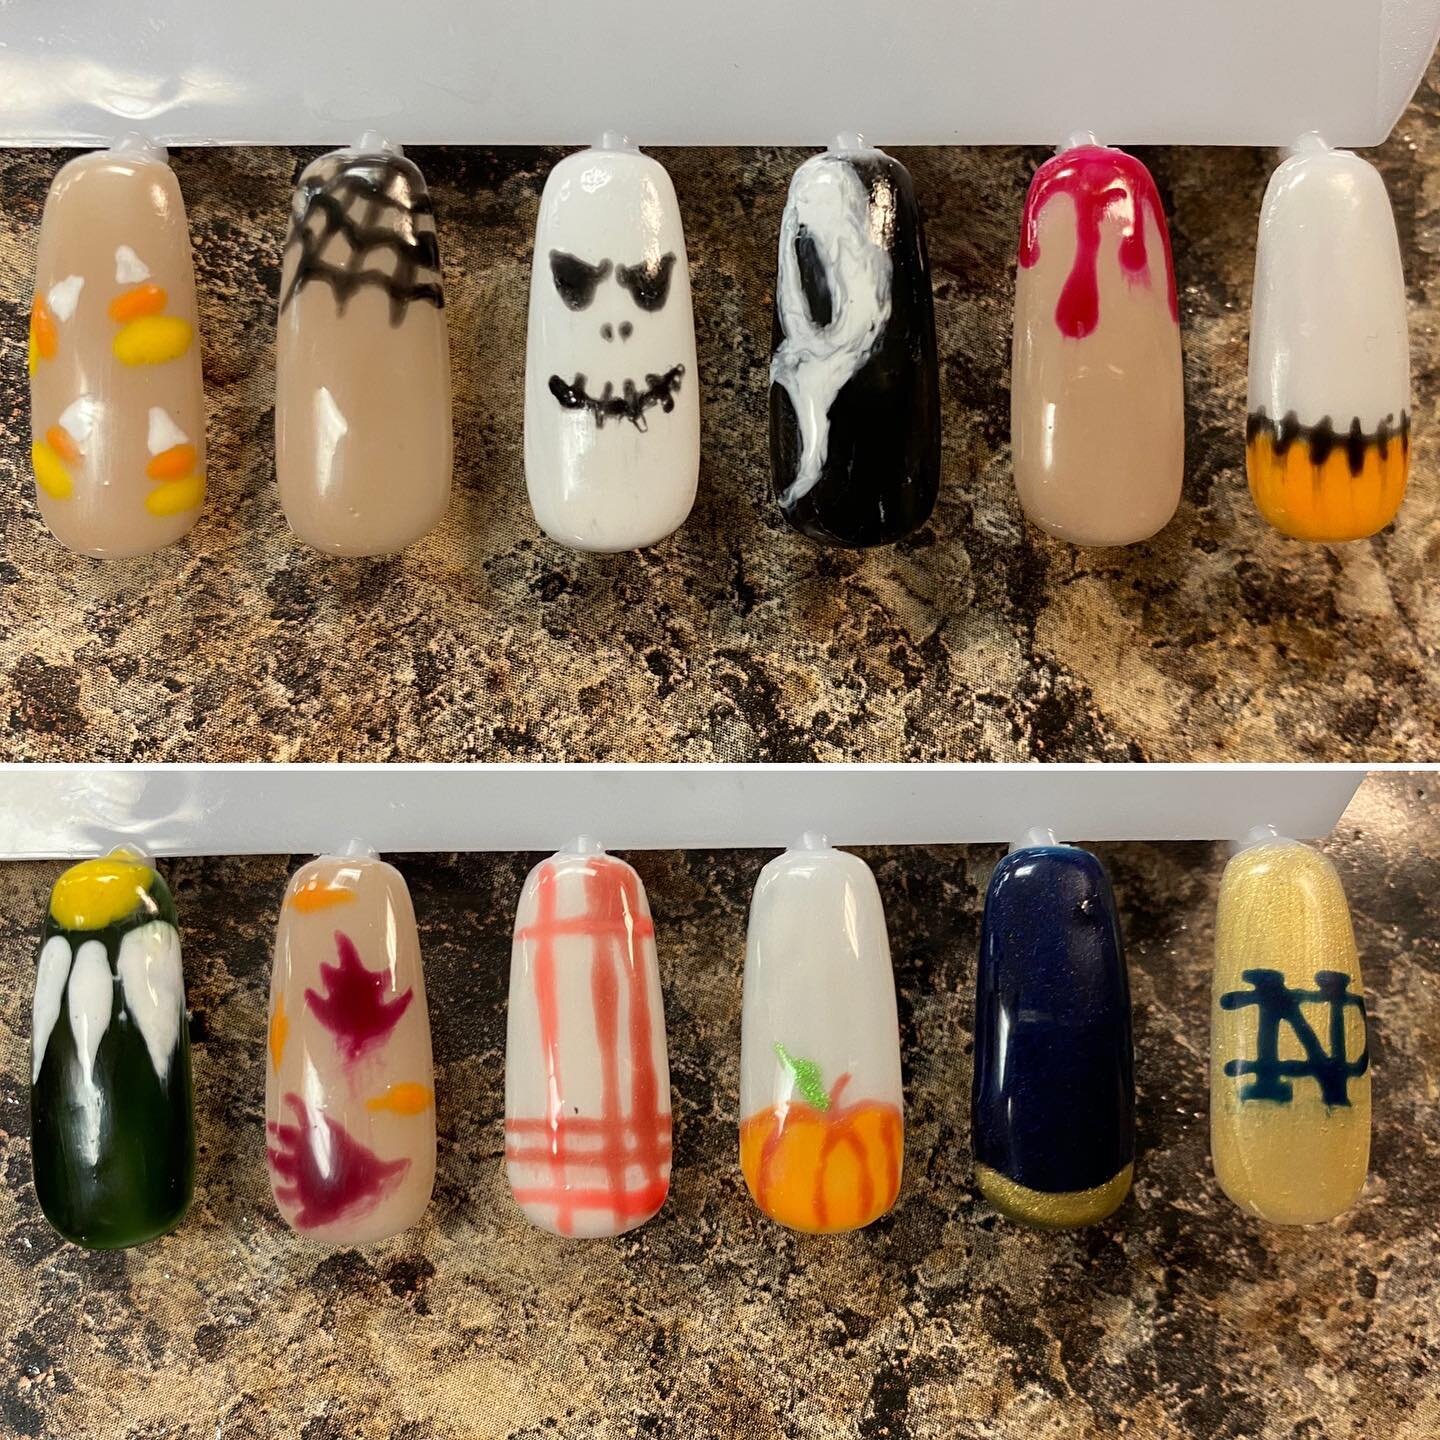 Autum Nail Art Designs by Libby! 🍂🍁
.
Book a Spa Gel Manicure with Libby and get two nail art designs included! 
.
Only $45, saving you $10
.
Call (574)256-1111 to book your appointment now! She still has availability for Friday (9/18) and Saturday